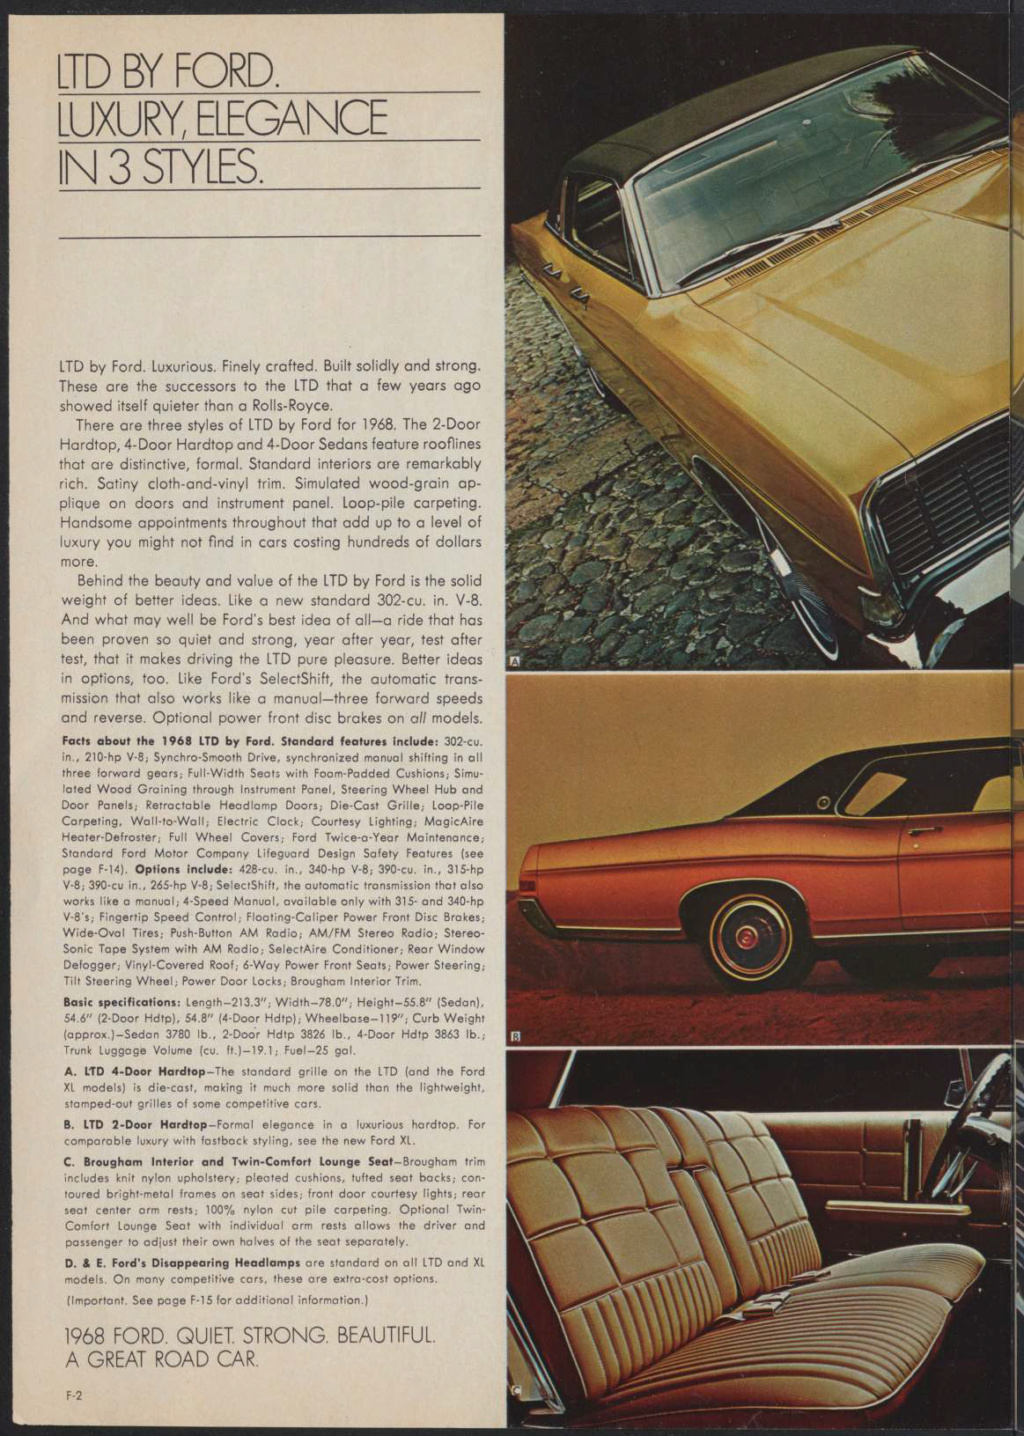 Brochure : 1968 Ford buyer's digest Image_30